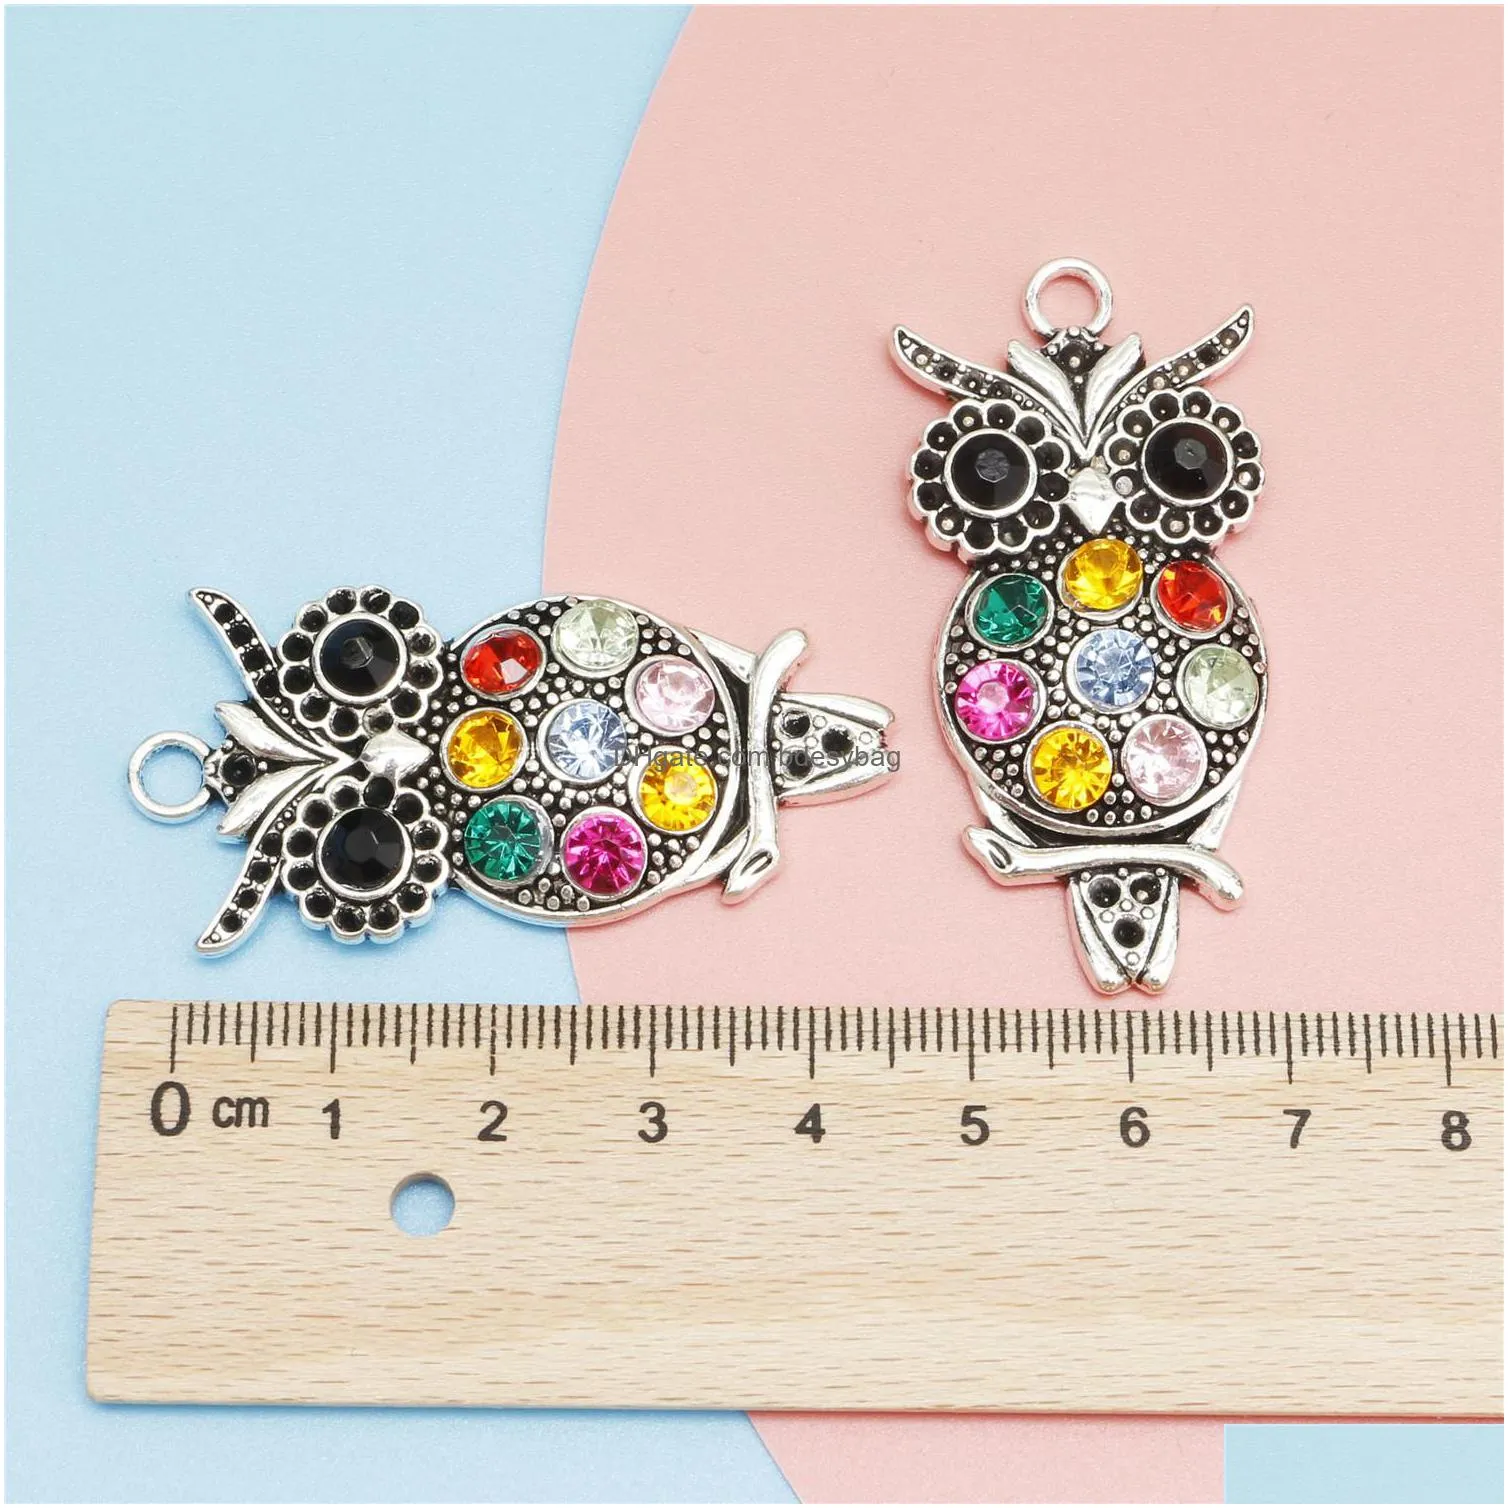 10pcs antique silver plated colorful crystal owl charm pendants for jewelry accessories making bracelet diy 49x23mm